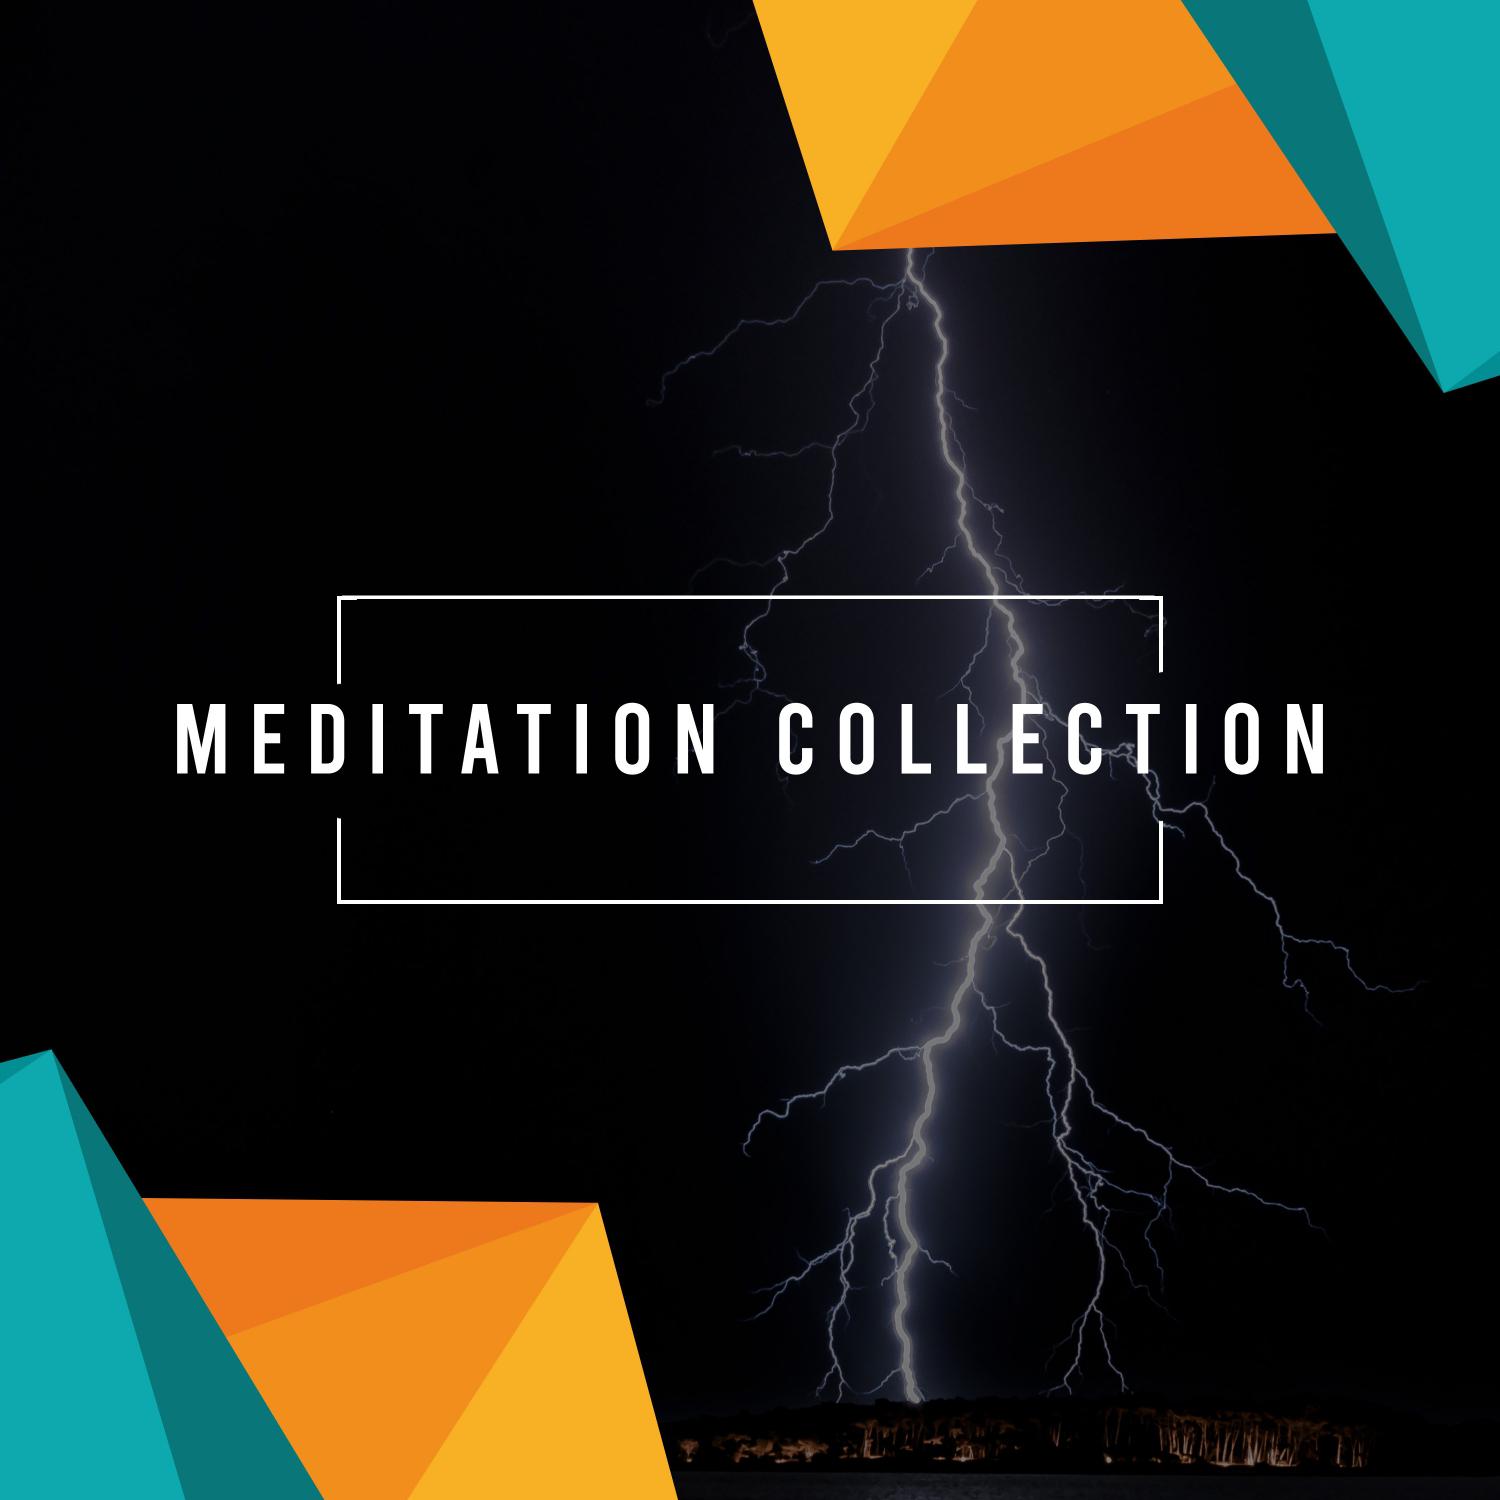 2017 Meditation Collection: Compilation of Meditation Sounds, Nature Sounds for Zen, Spa, Relaxation